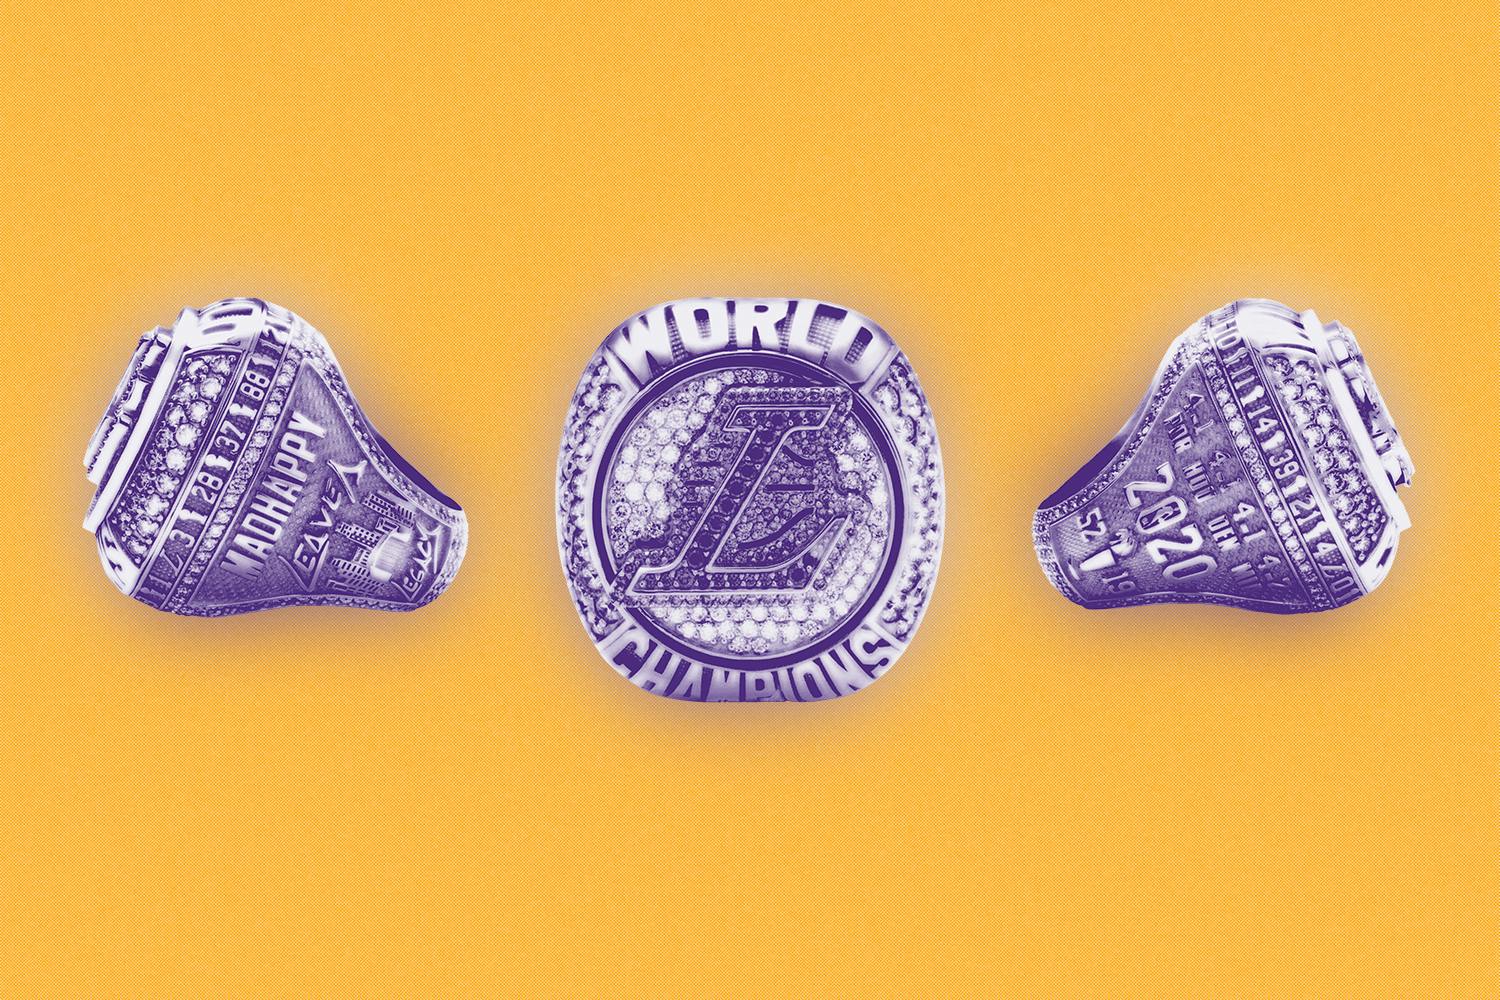 MadhappyⓇ / Los Angeles LakersⓇ Ring: By The Numbers